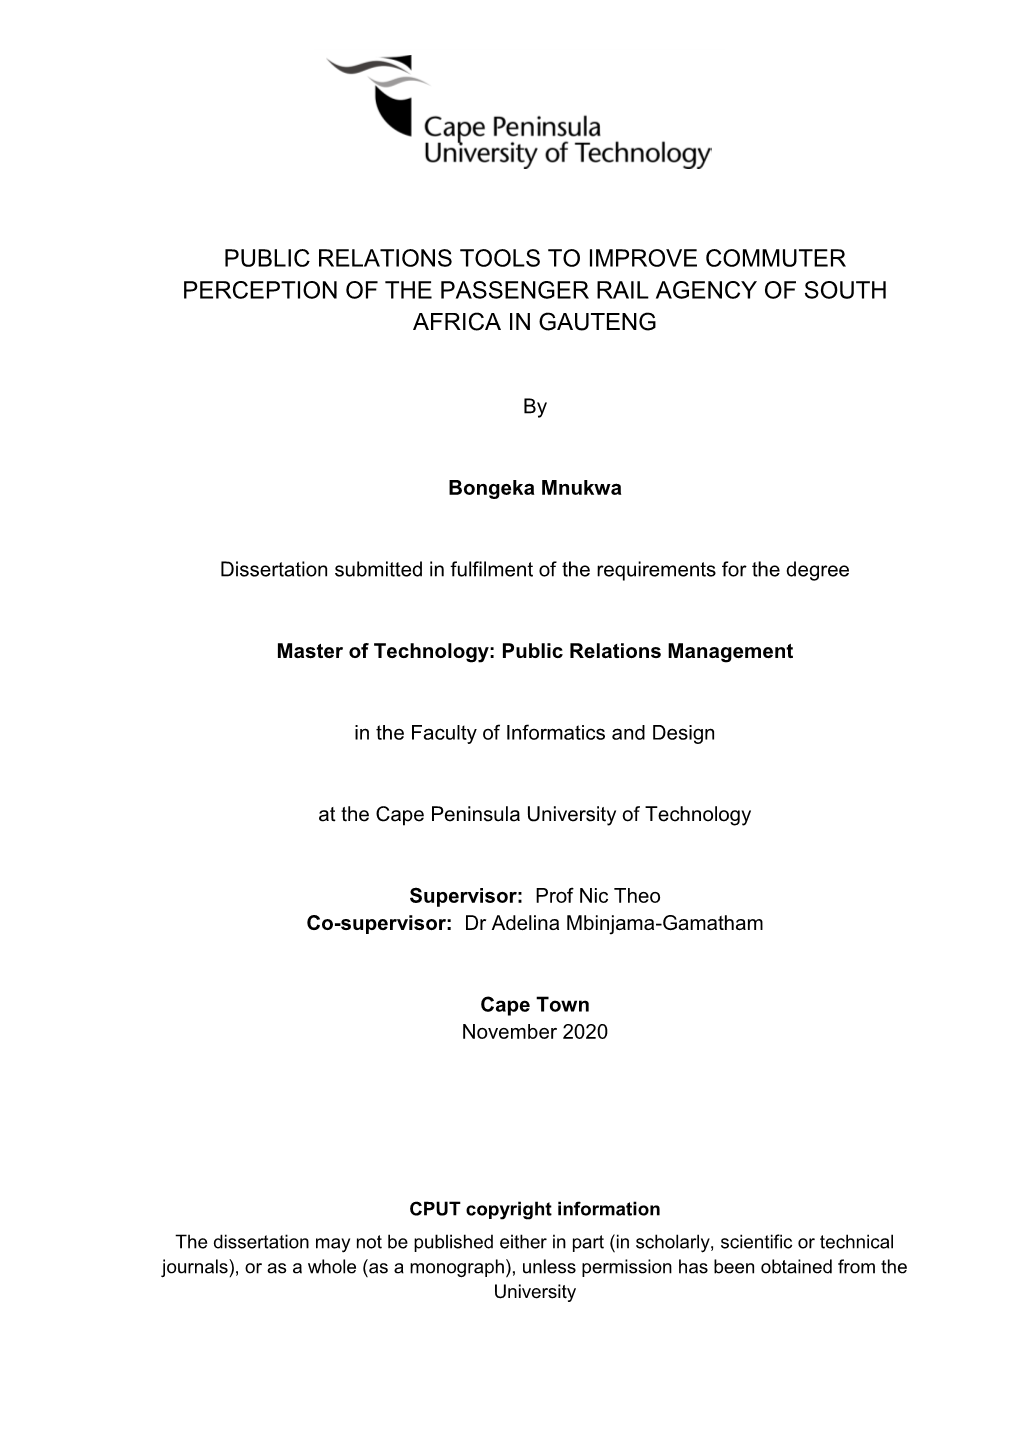 Public Relations Tools to Improve Commuter Perception of the Passenger Rail Agency of South Africa in Gauteng